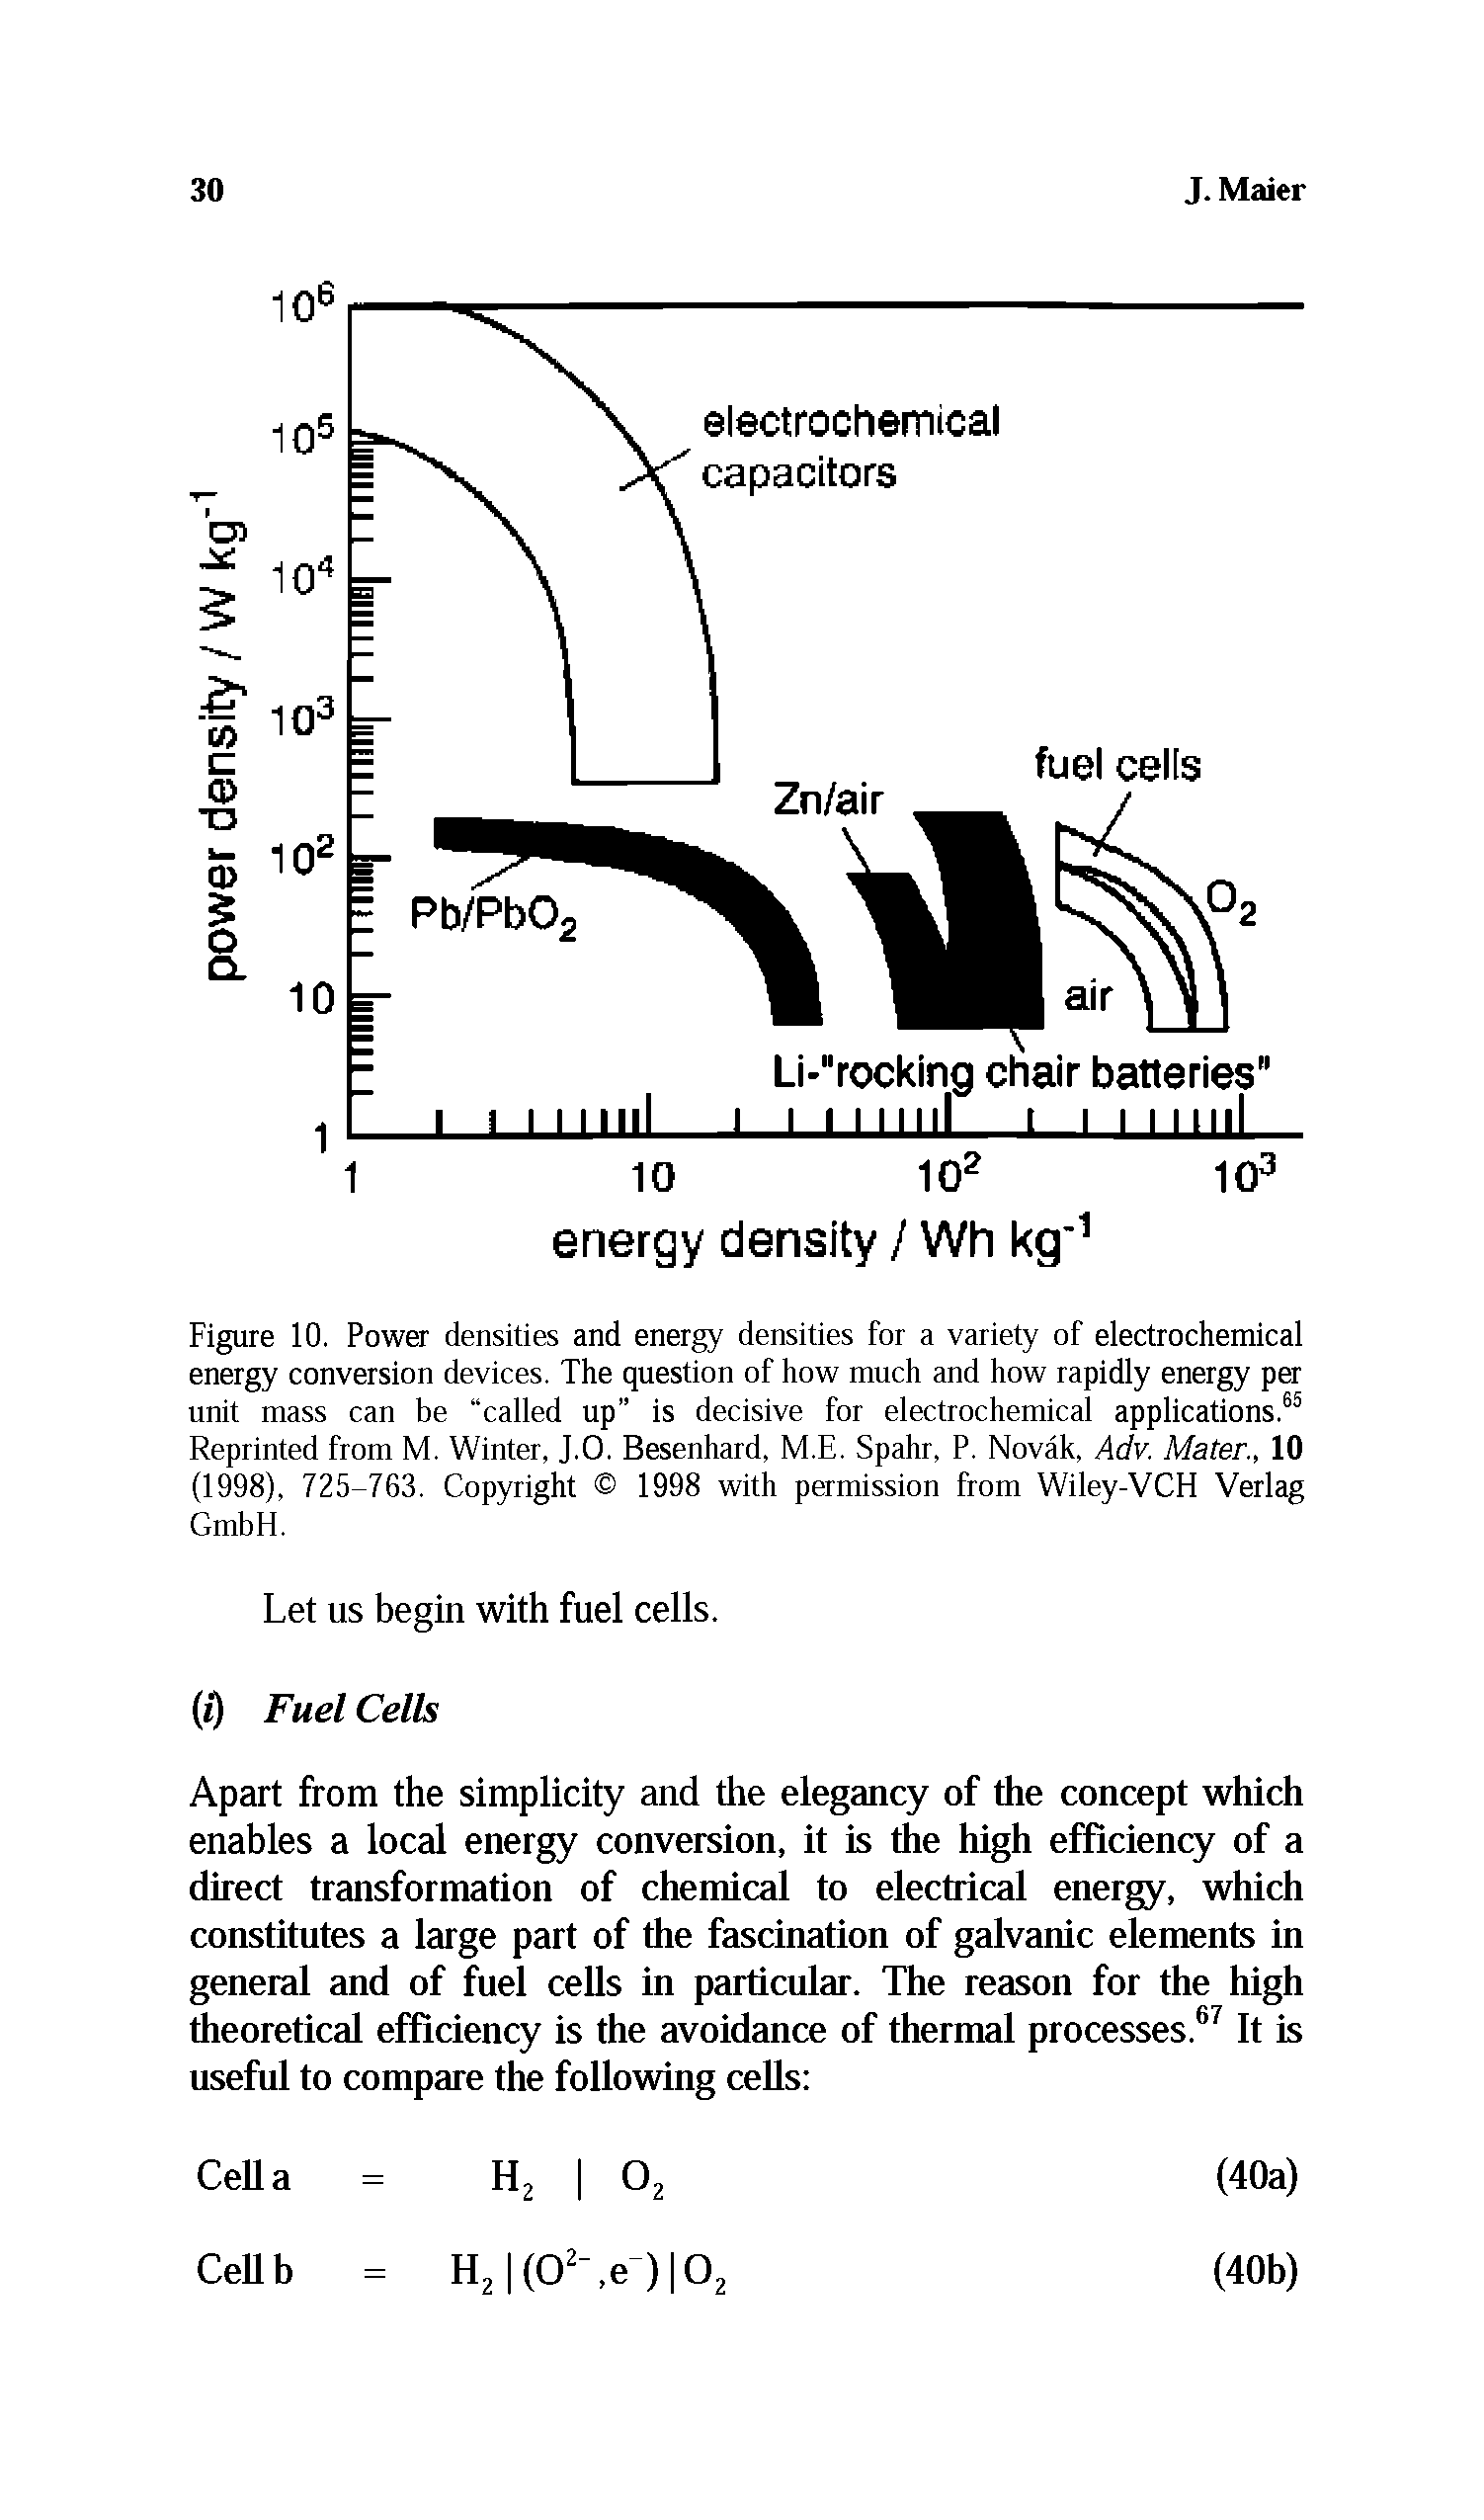 Figure 10. Power densities and energy densities for a variety of electrochemical energy conversion devices. The question of how much and how rapidly energy per unit mass can be called up is decisive for electrochemical applications.65 Reprinted from M. Winter, J.O. Besenhard, M.E. Spahr, P. Novak, Adv. Mater., 10 (1998), 725-763. Copyright 1998 with permission from Wiley-VCH Verlag GmbH.